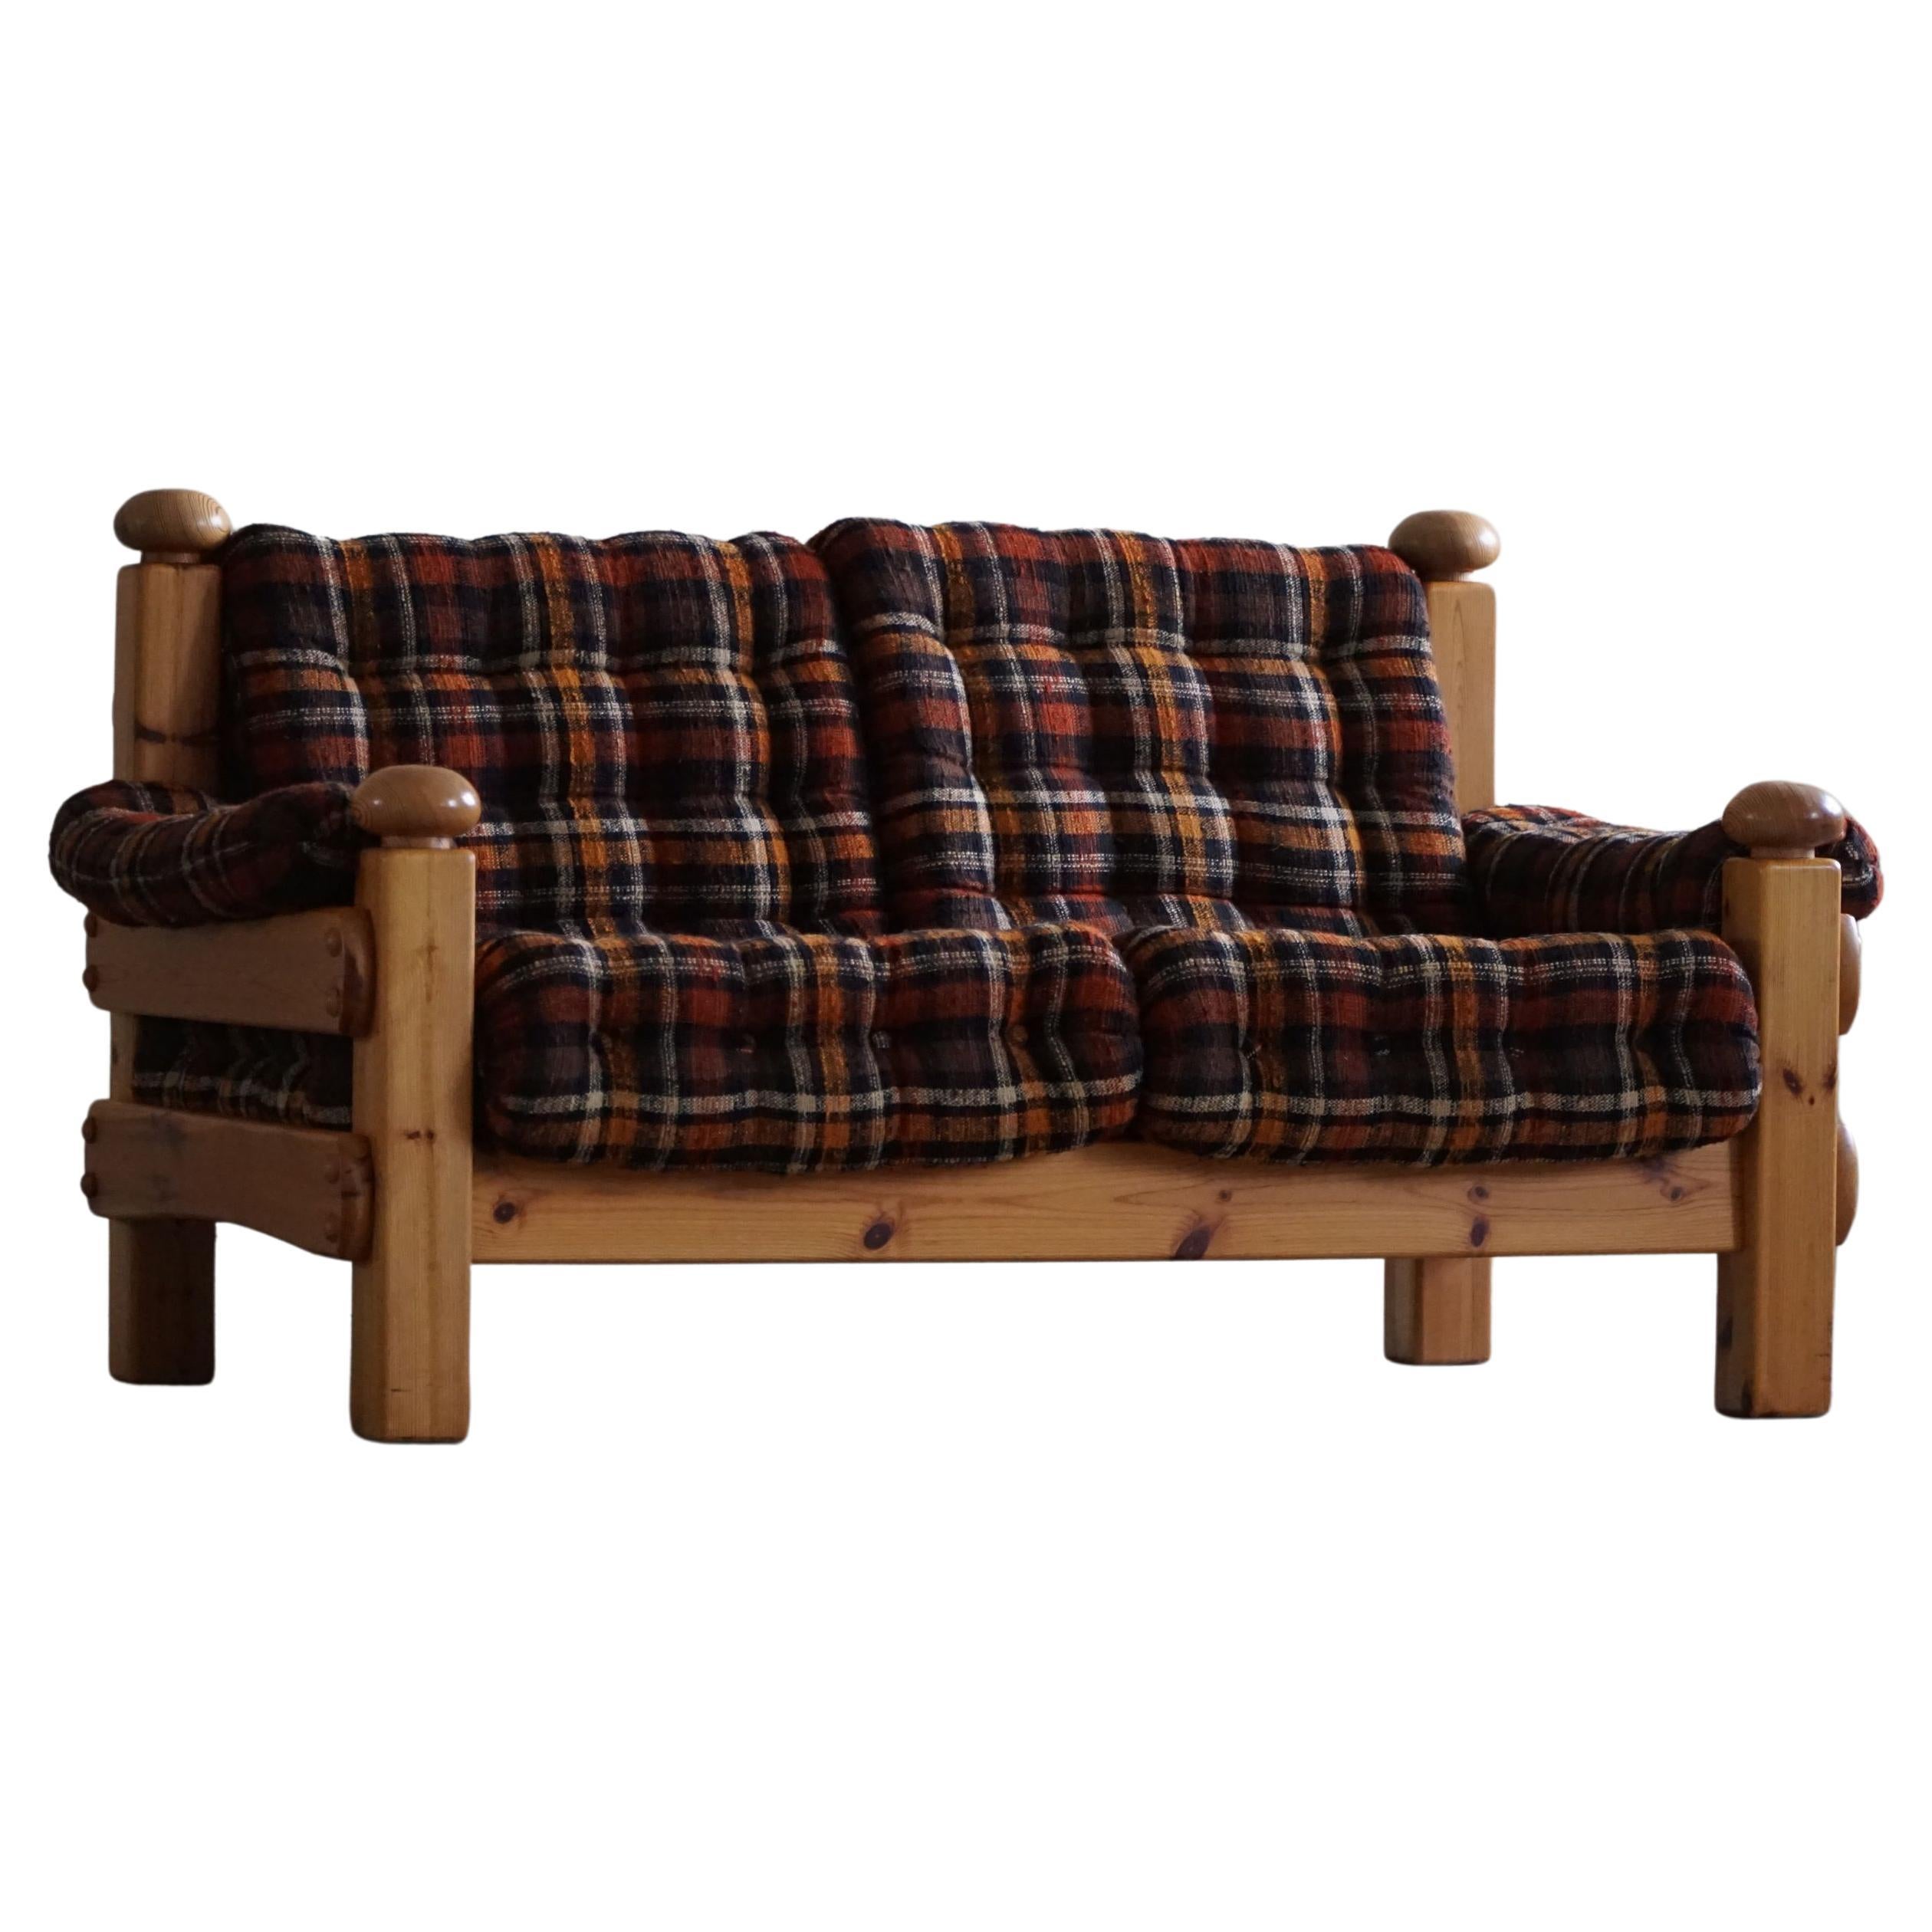 Two Seater Brutalist Sofa in Solid Pine, Swedish Modern, Made in the 1970s For Sale